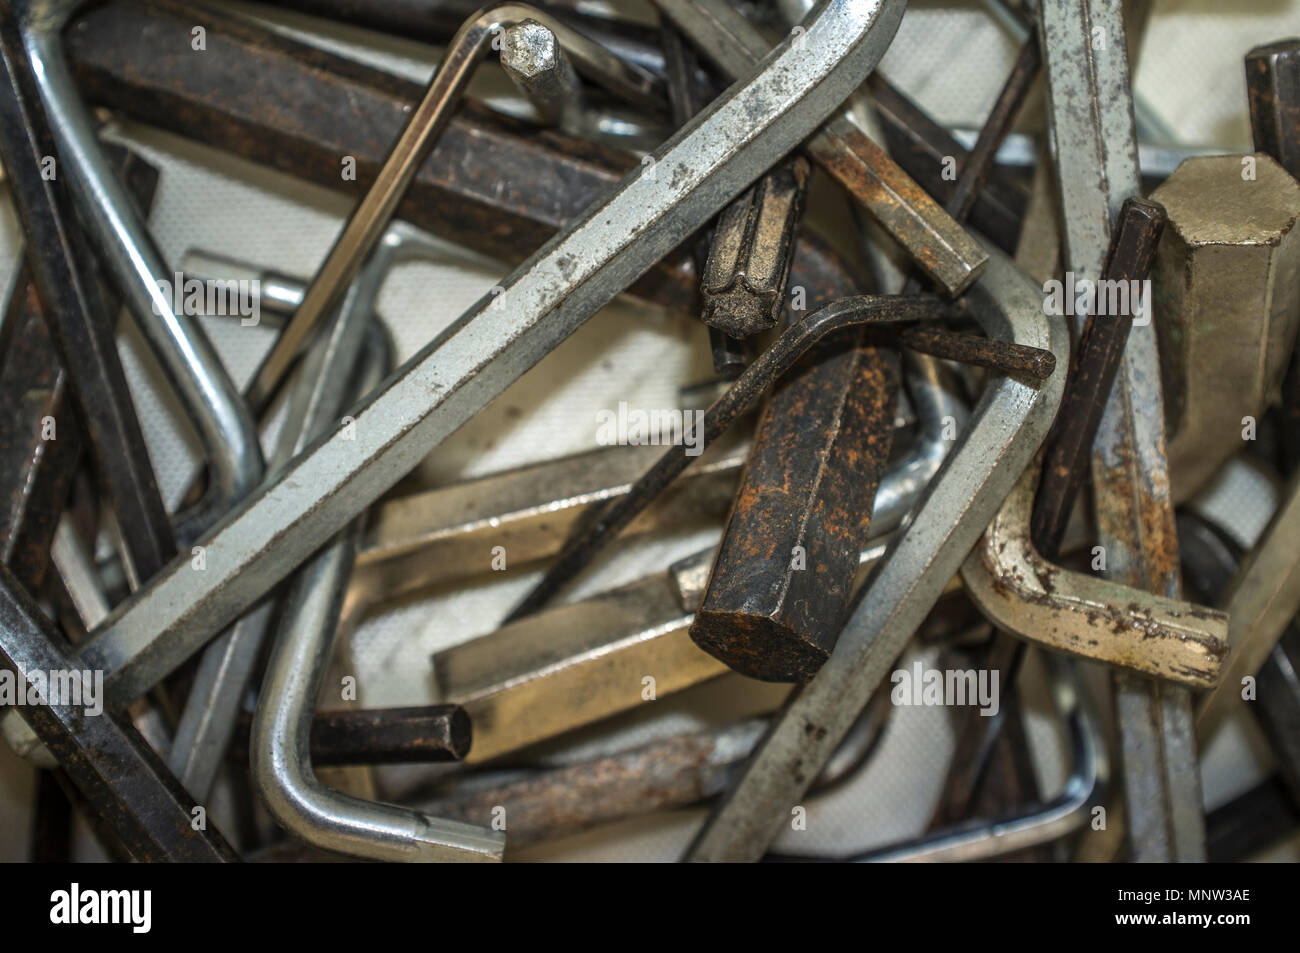 Box full of used hex keys for end-user assembly furniture. Closeup Stock Photo